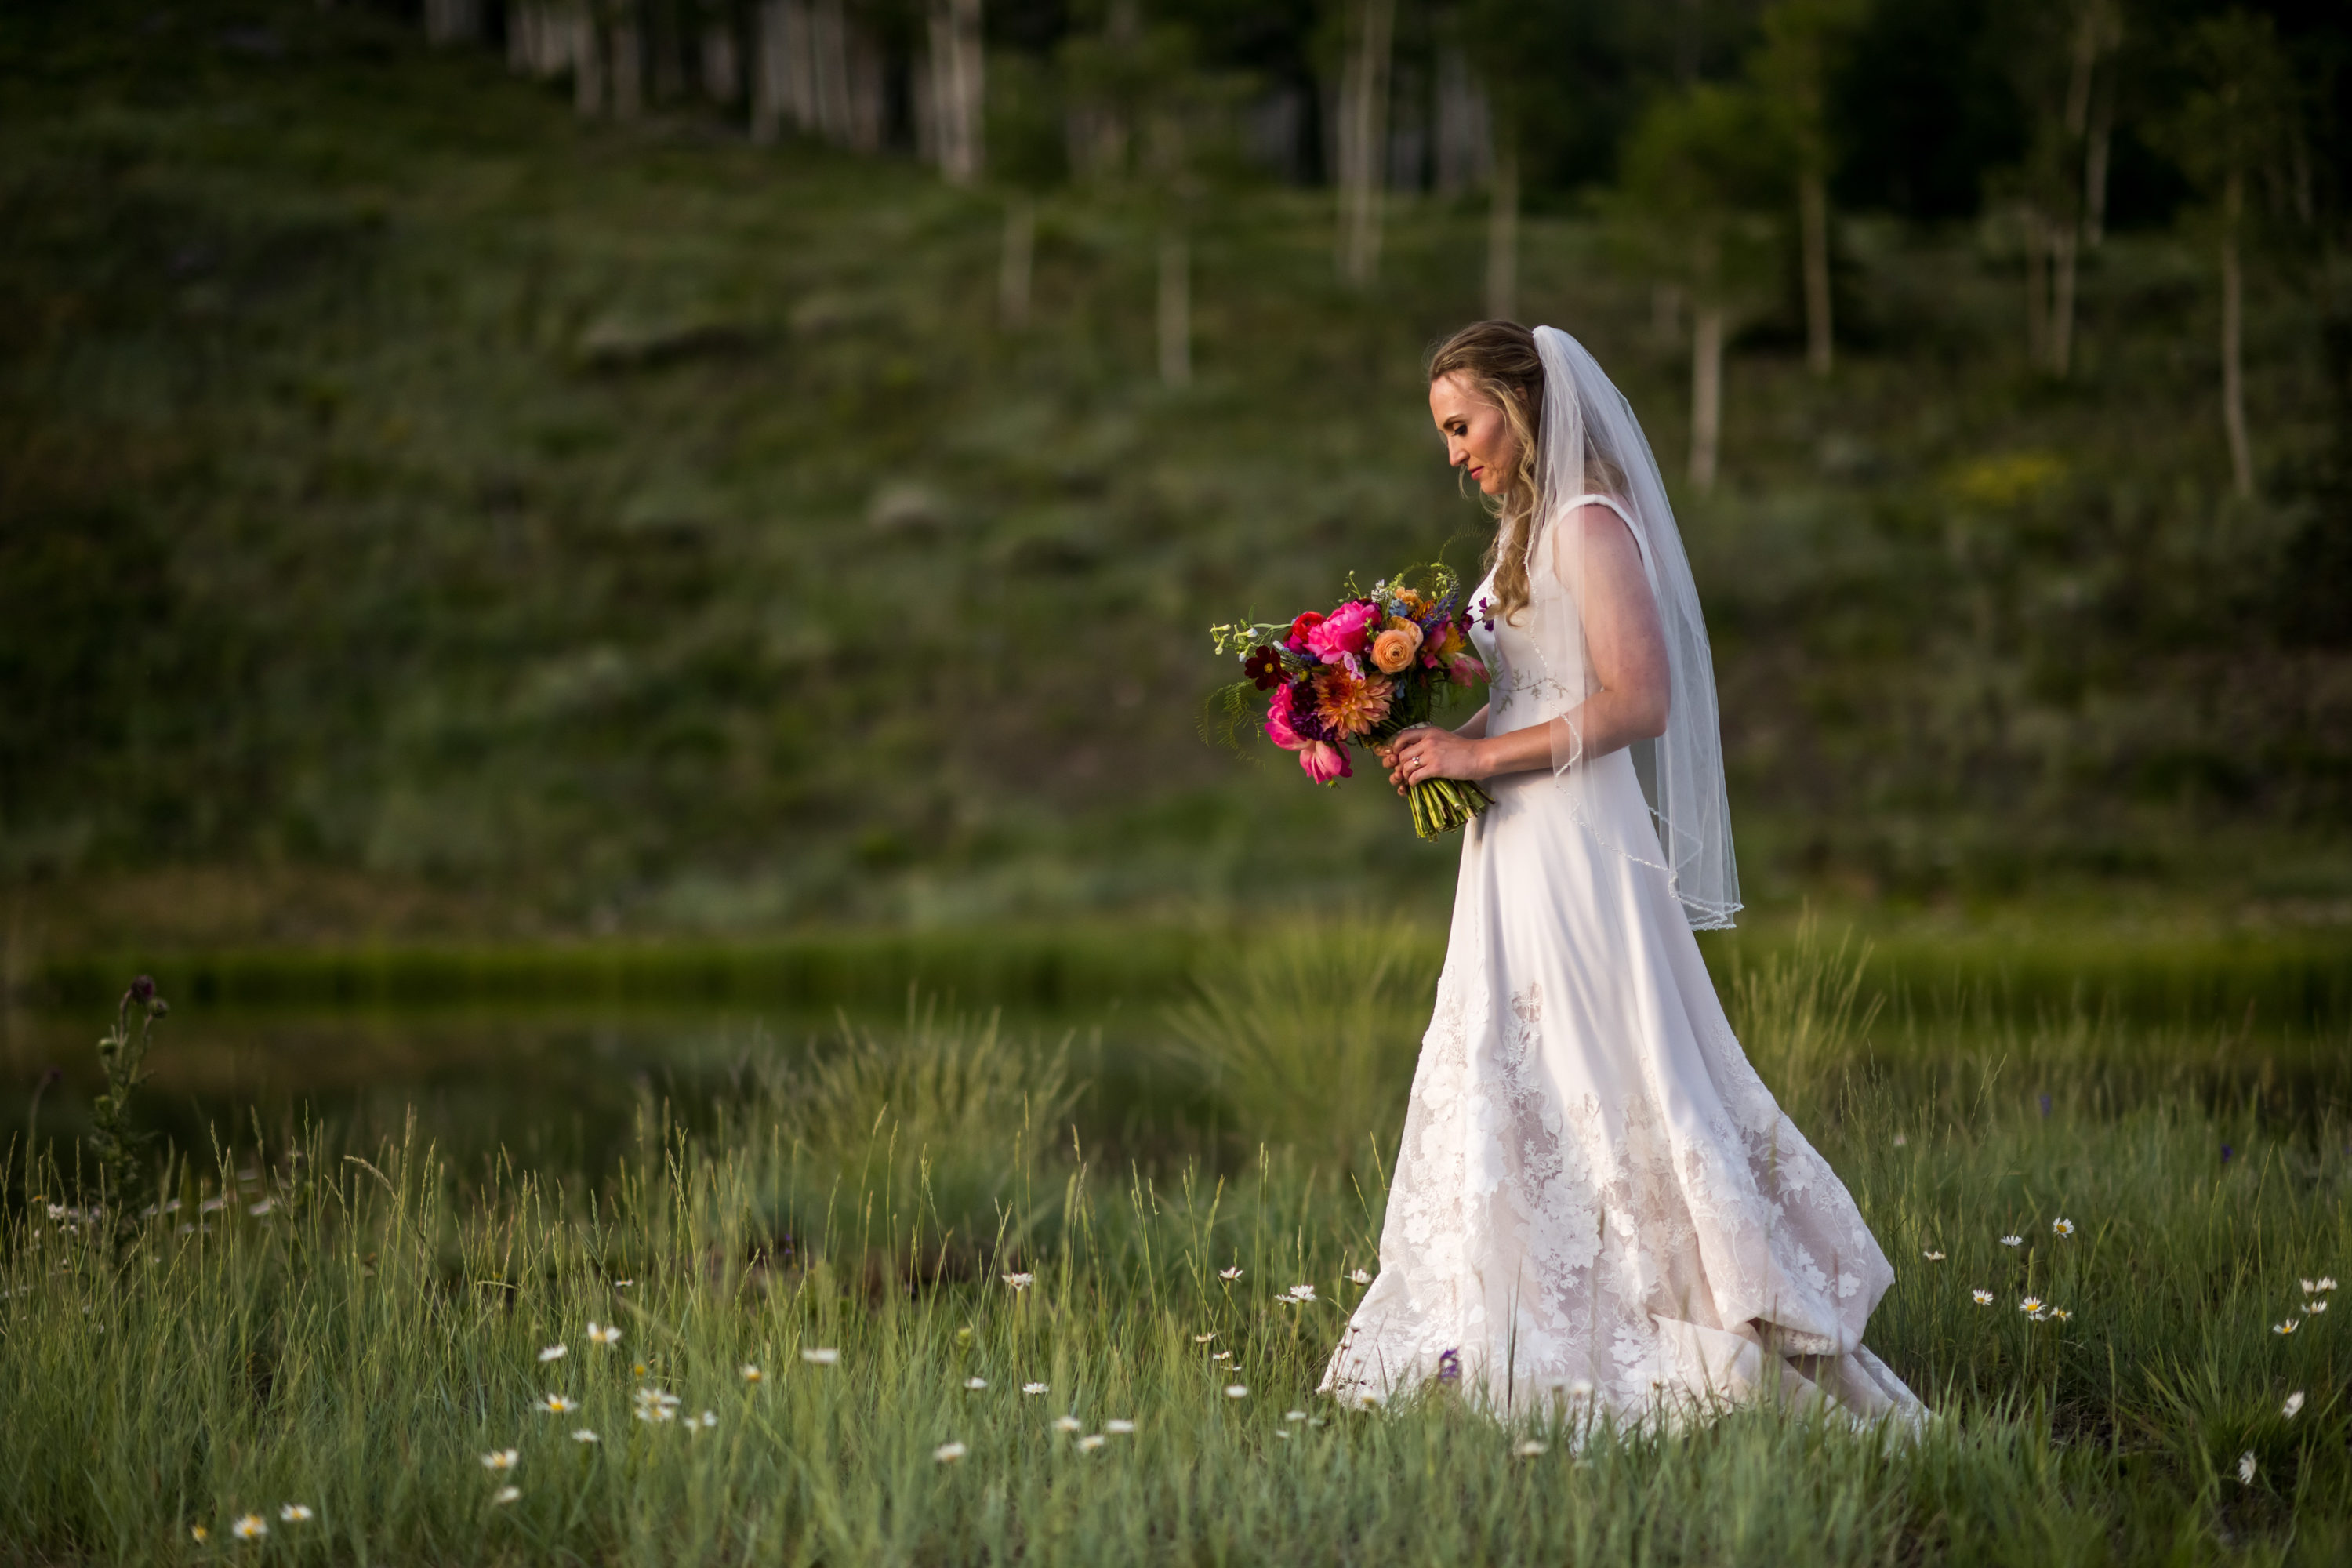 The bride poses at sunset during Telluride, Colorado, wedding.